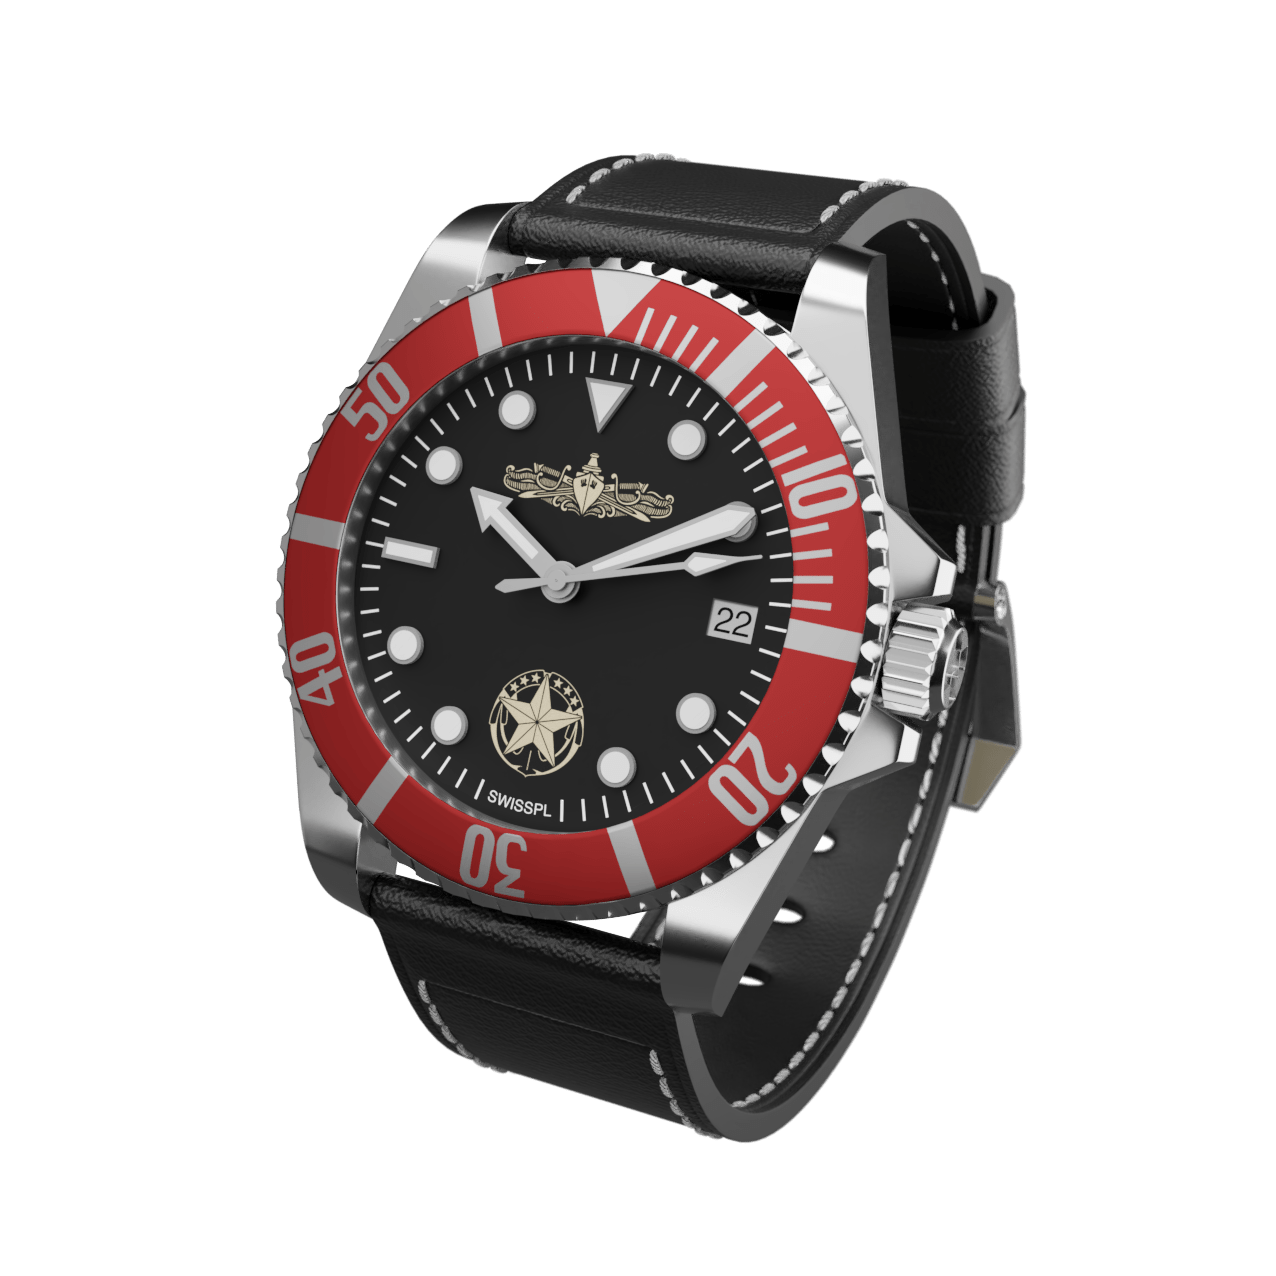 Surface Warfare Officer / Command At Sea / Classic 42mm